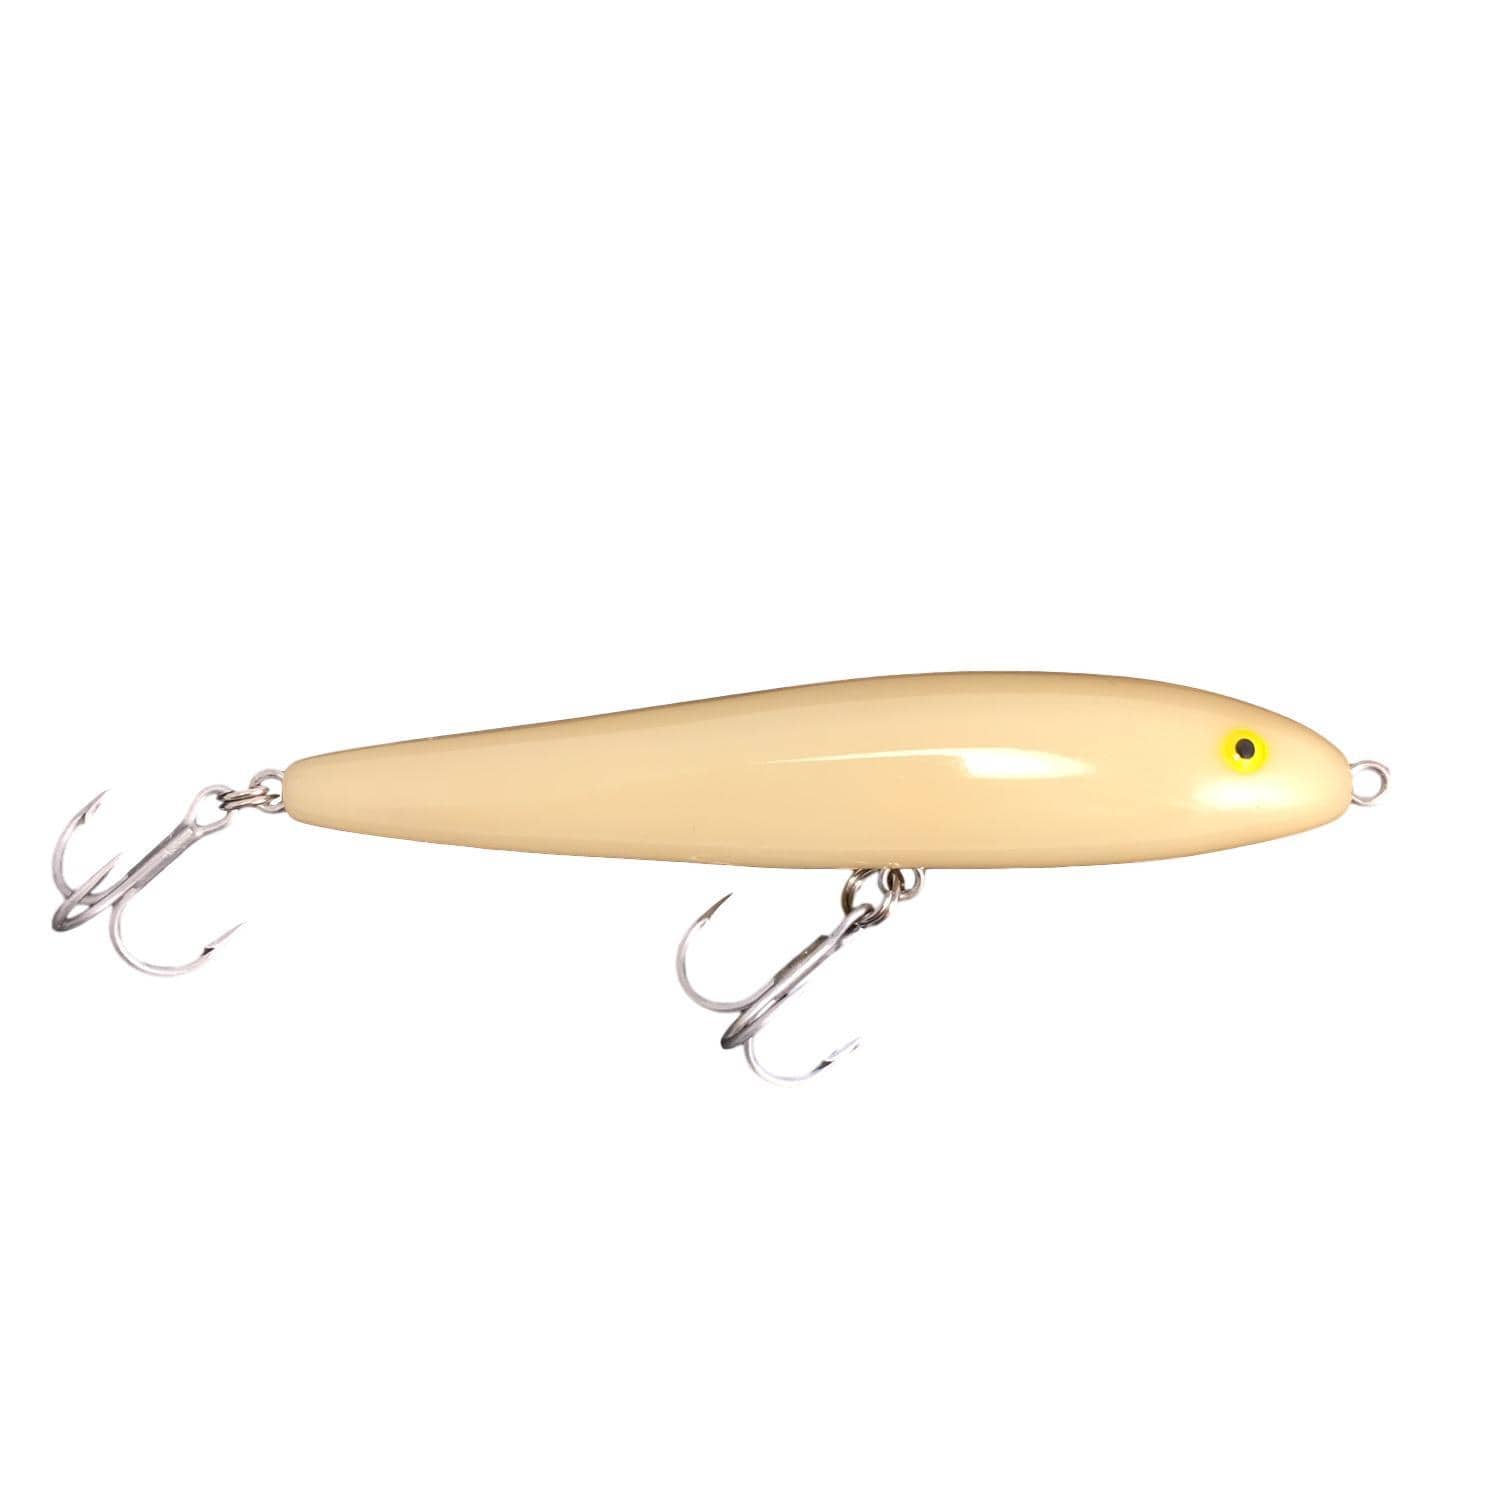 Topwater Walkers For Striped Bass On The Water, 46% OFF